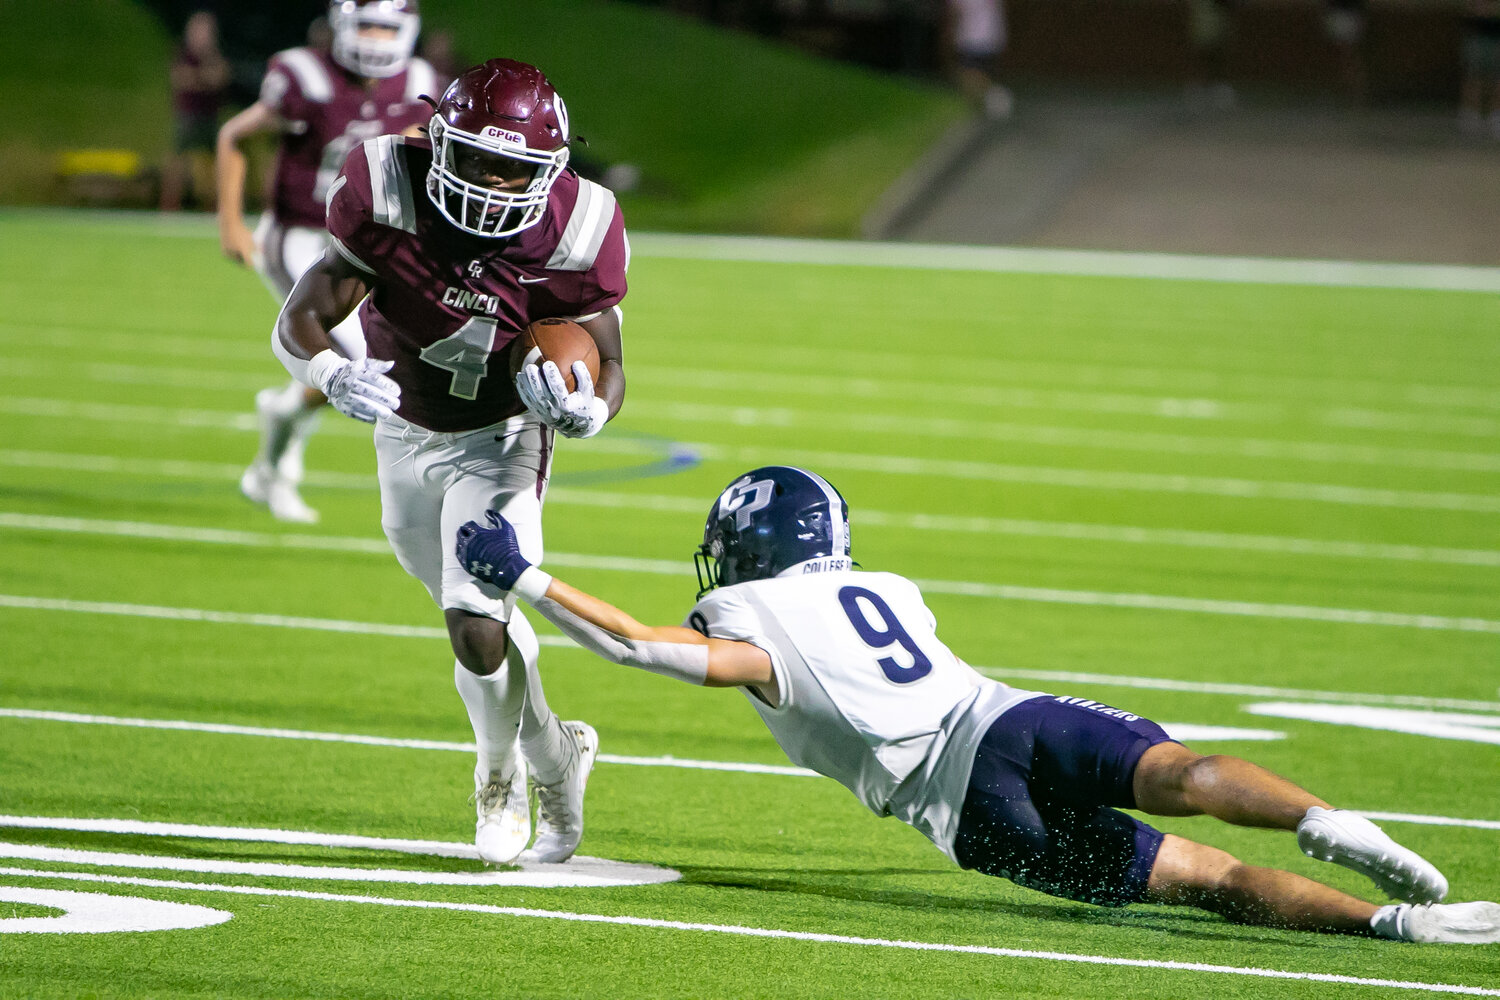 Tessiah Young breaks a tackle during Friday's game between Cinco Ranch and College Park at Rhodes Stadium.